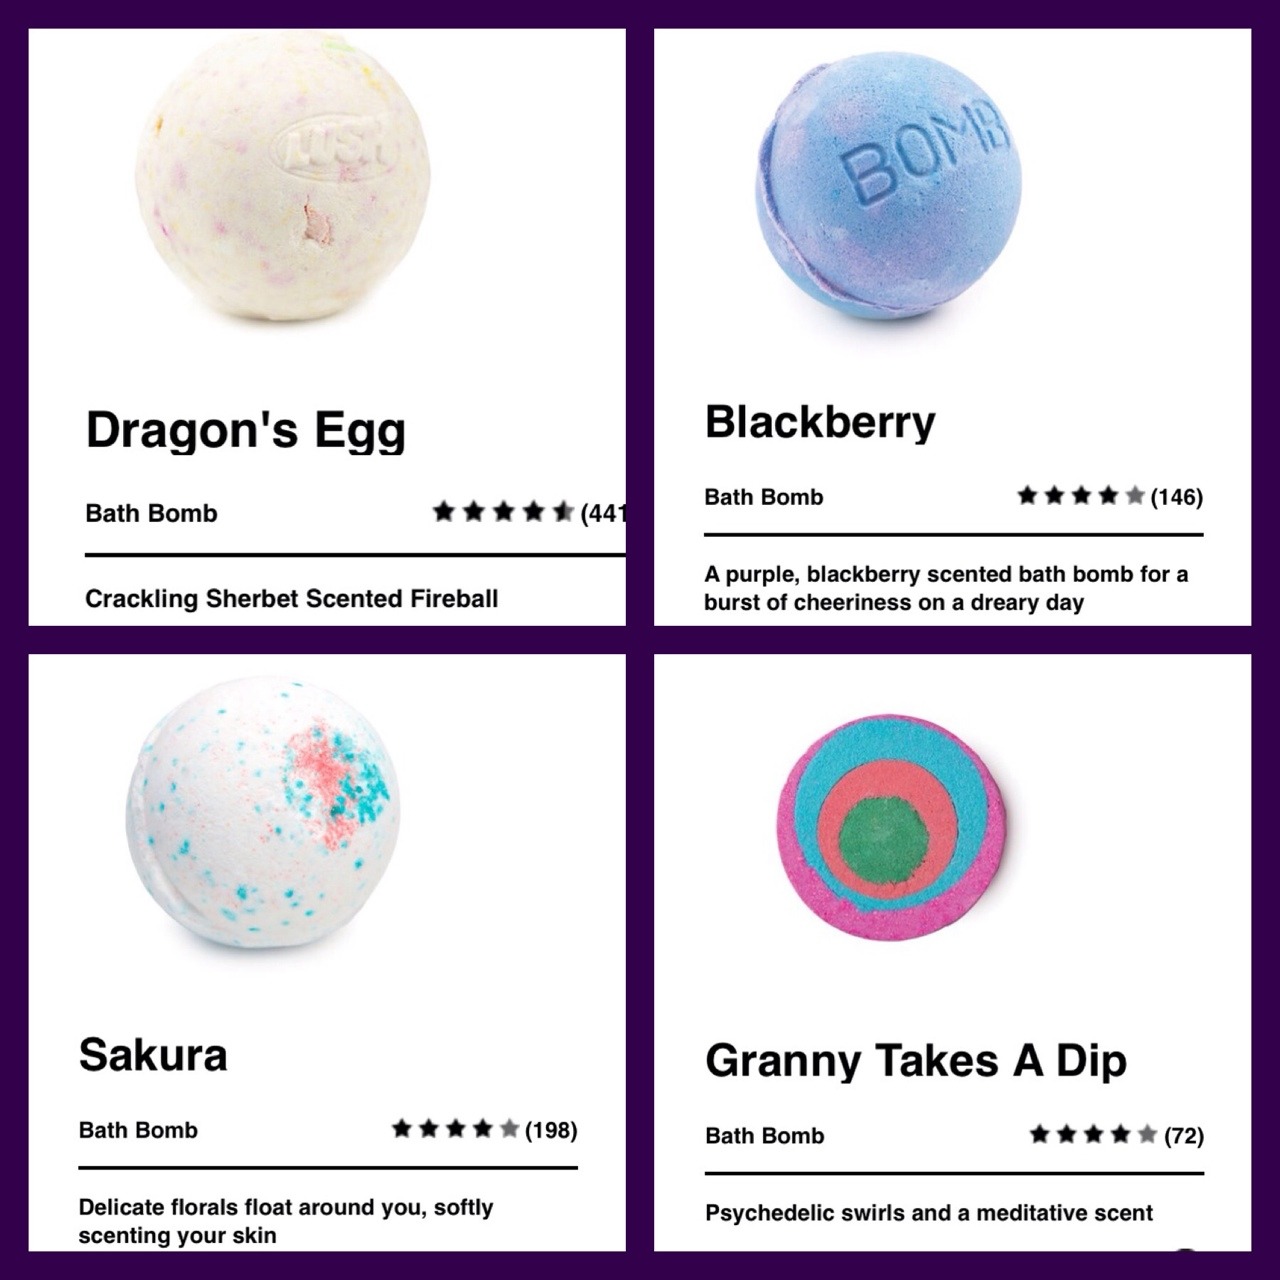 tongue-tied-terrified:  LUSH BATHBOMB GIVEAWAY!!! So with all the bath bomb craze,